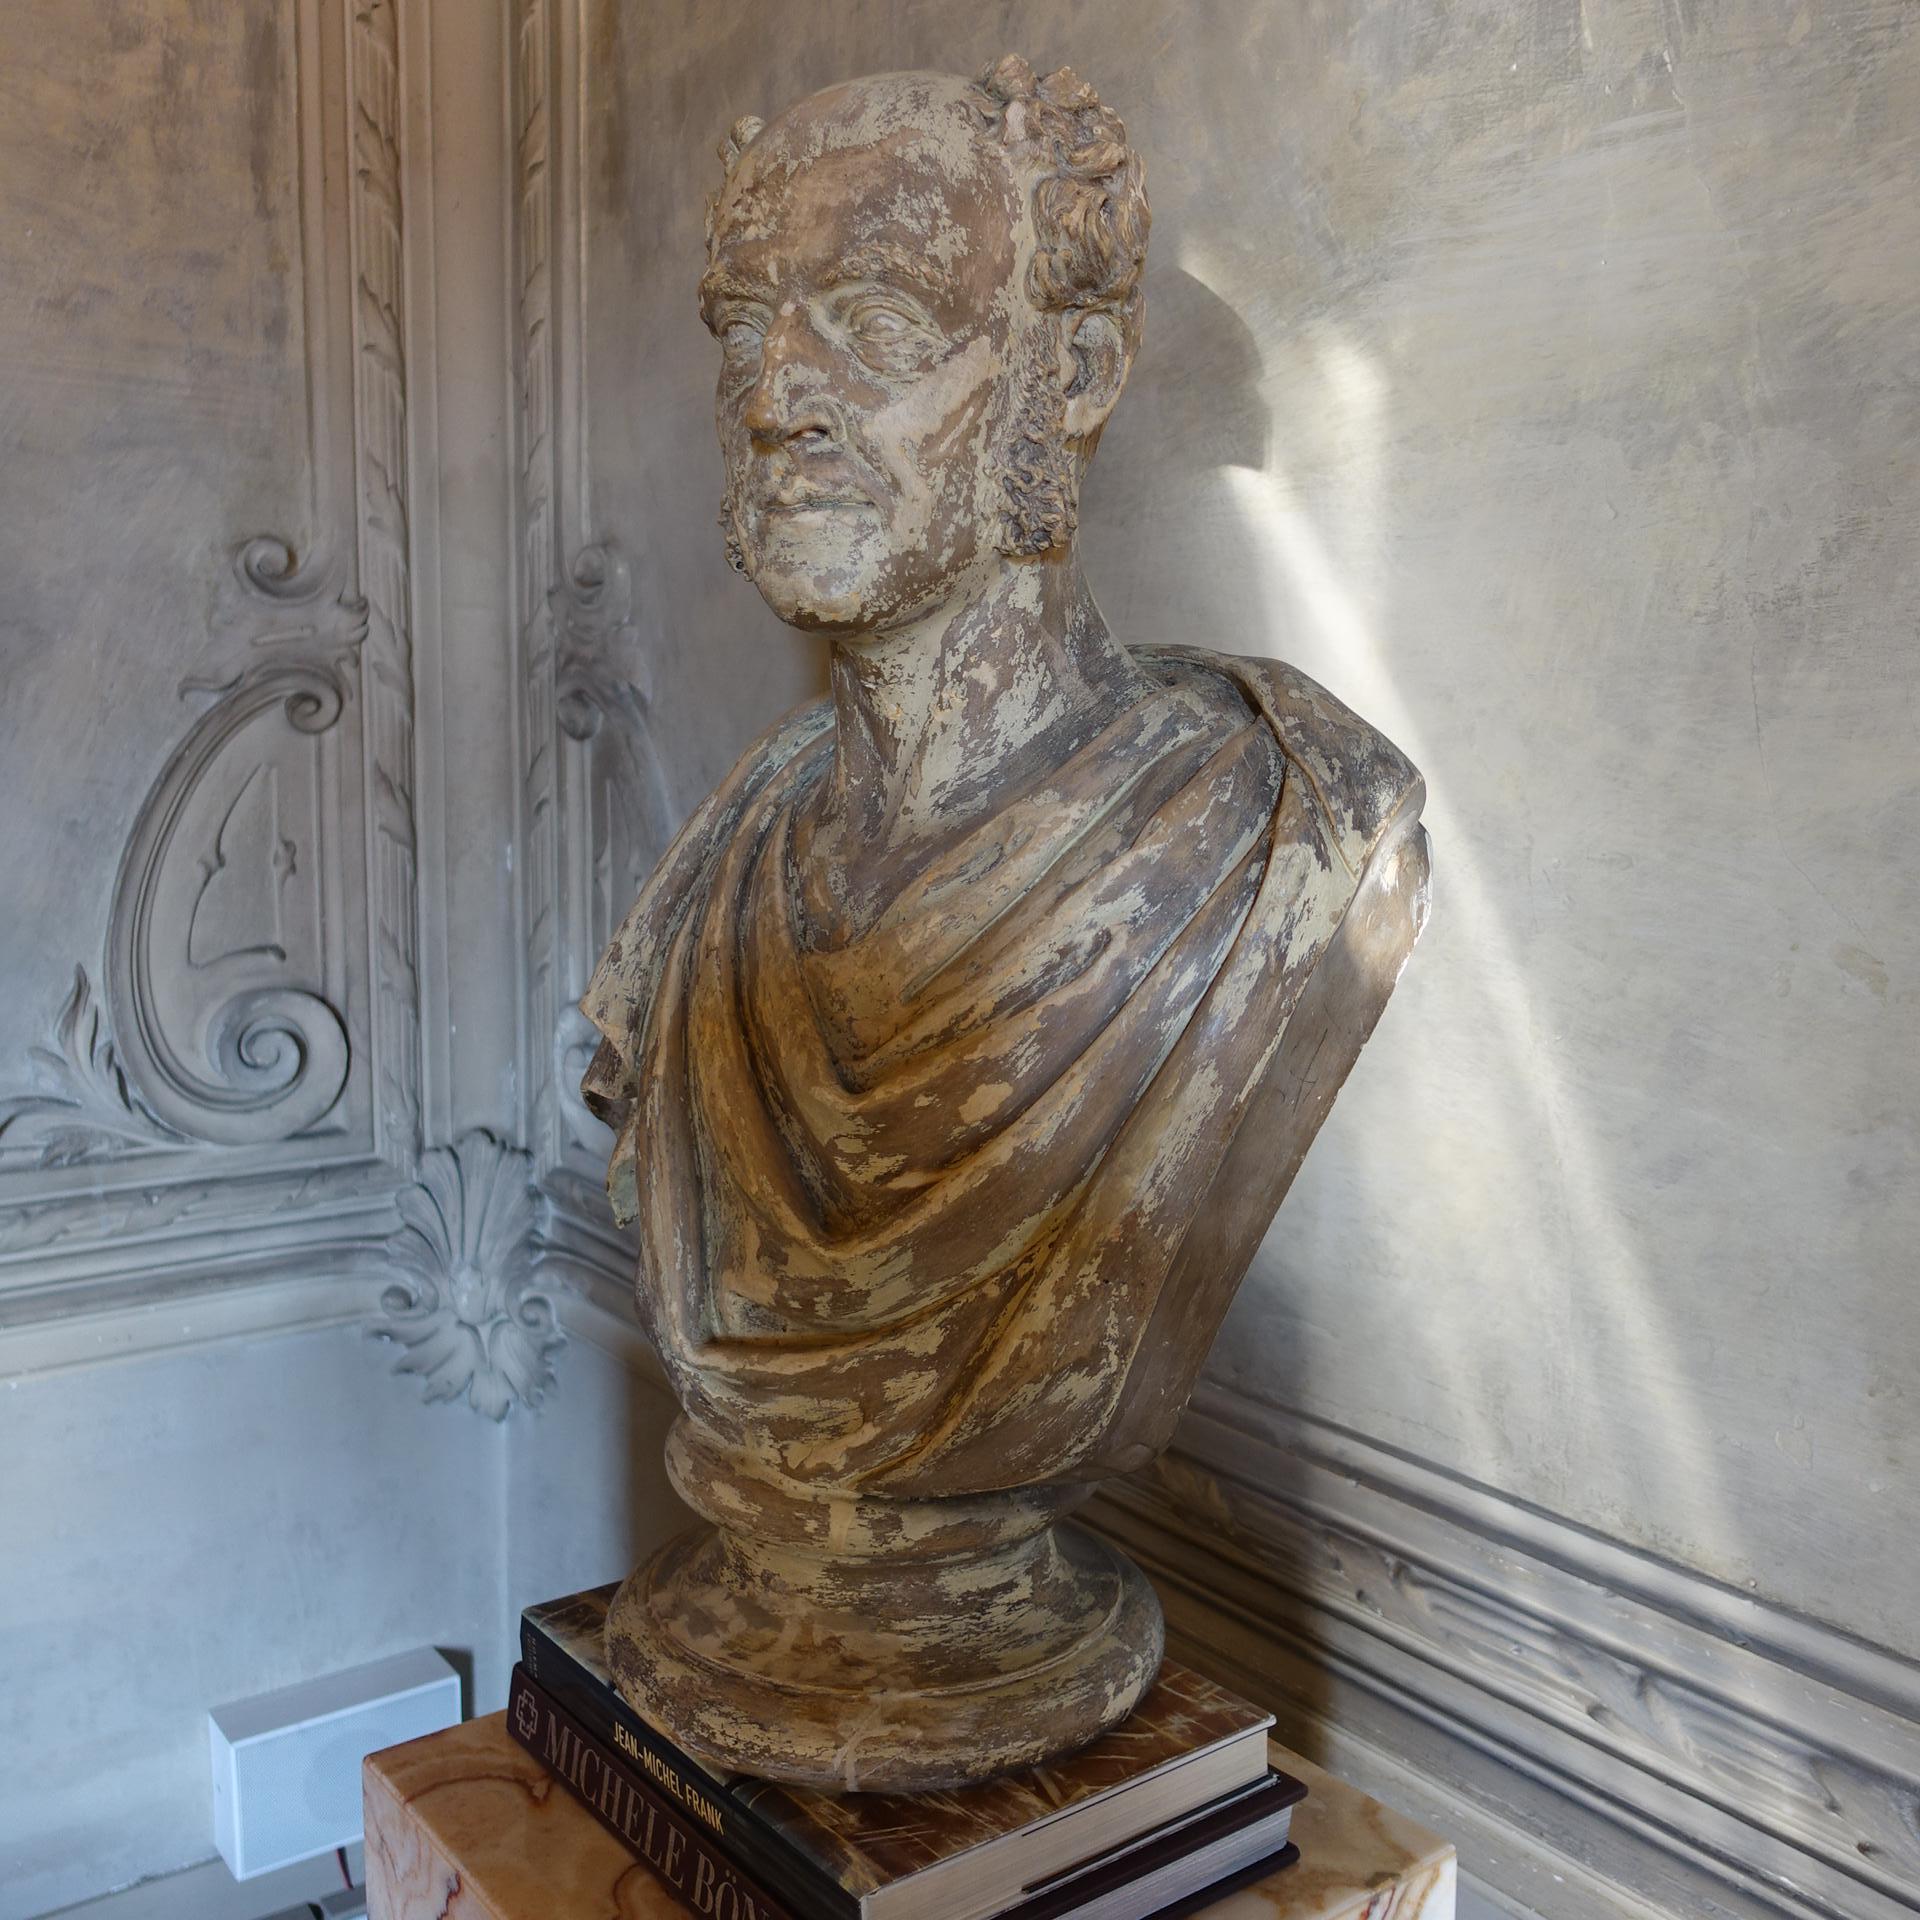 Plaster sculpture bust of John Michael Shum, Bath England 1797-1872, perfect condition and vintage patina.